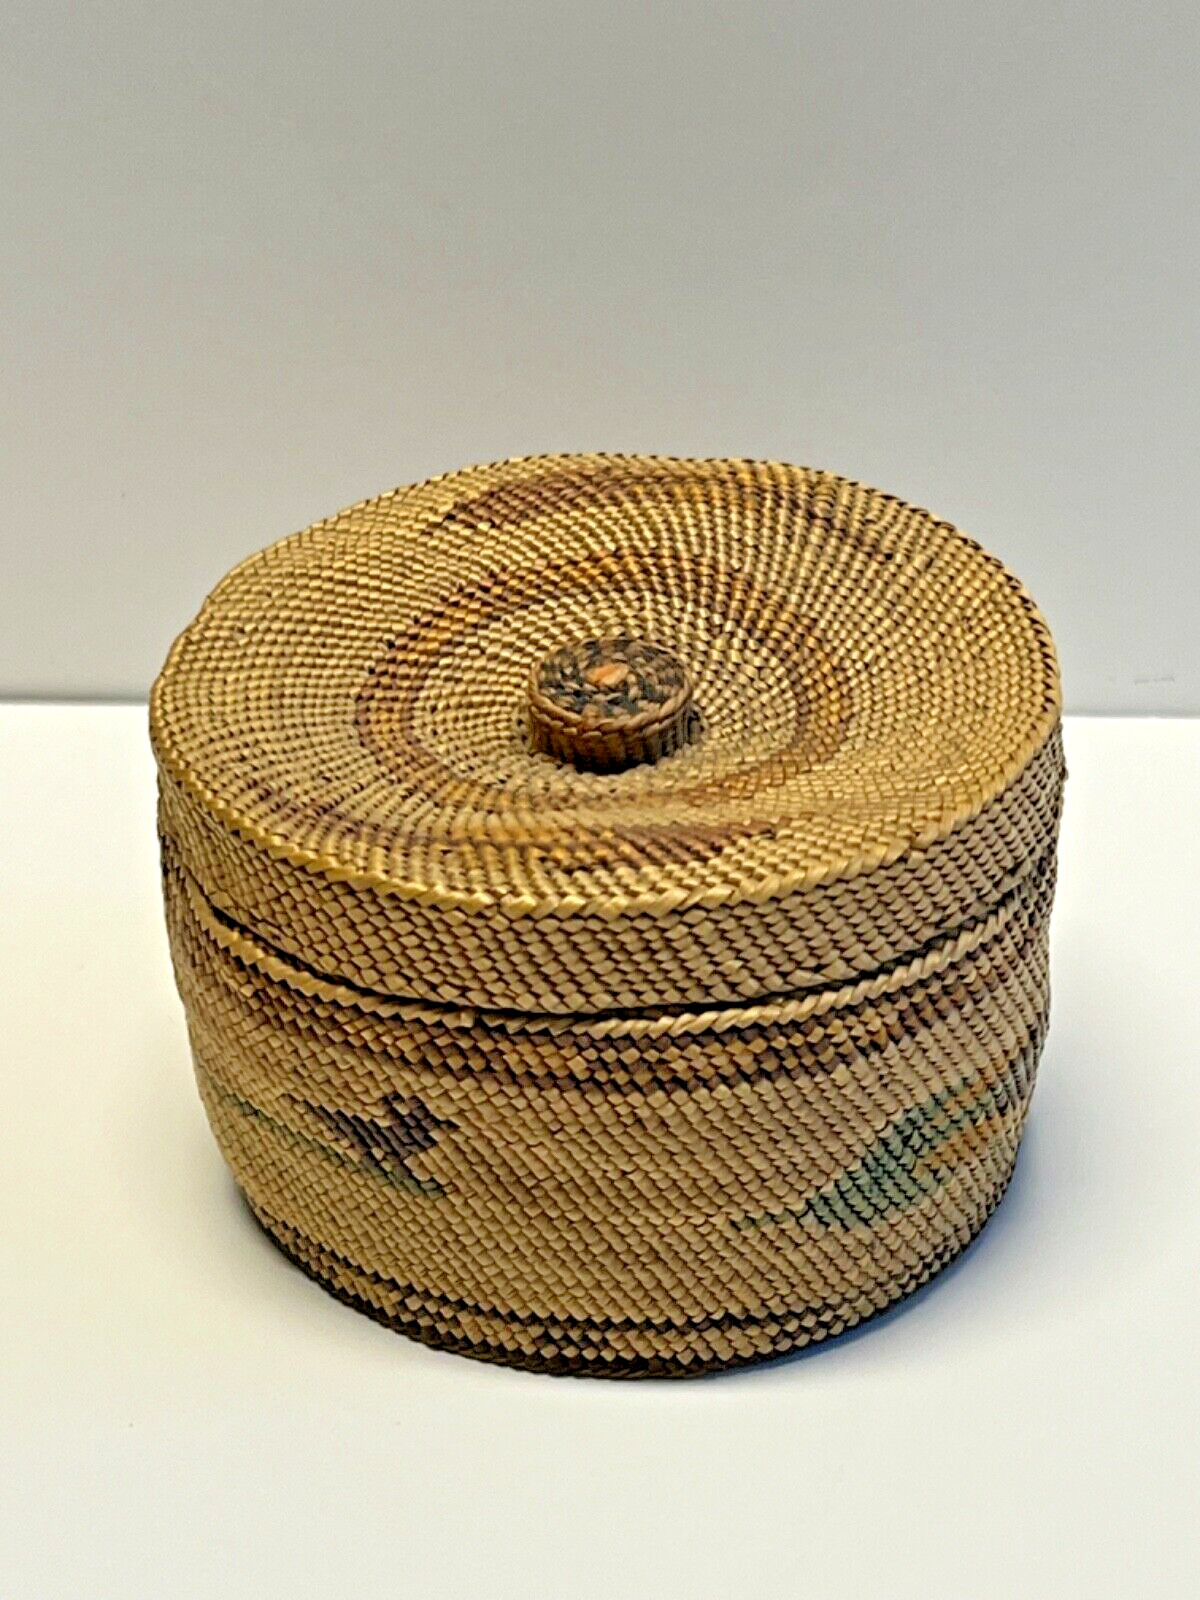 Nootka Alaskan Hand Woven Basket; Early 1900s; Small with Lid; Lot 15